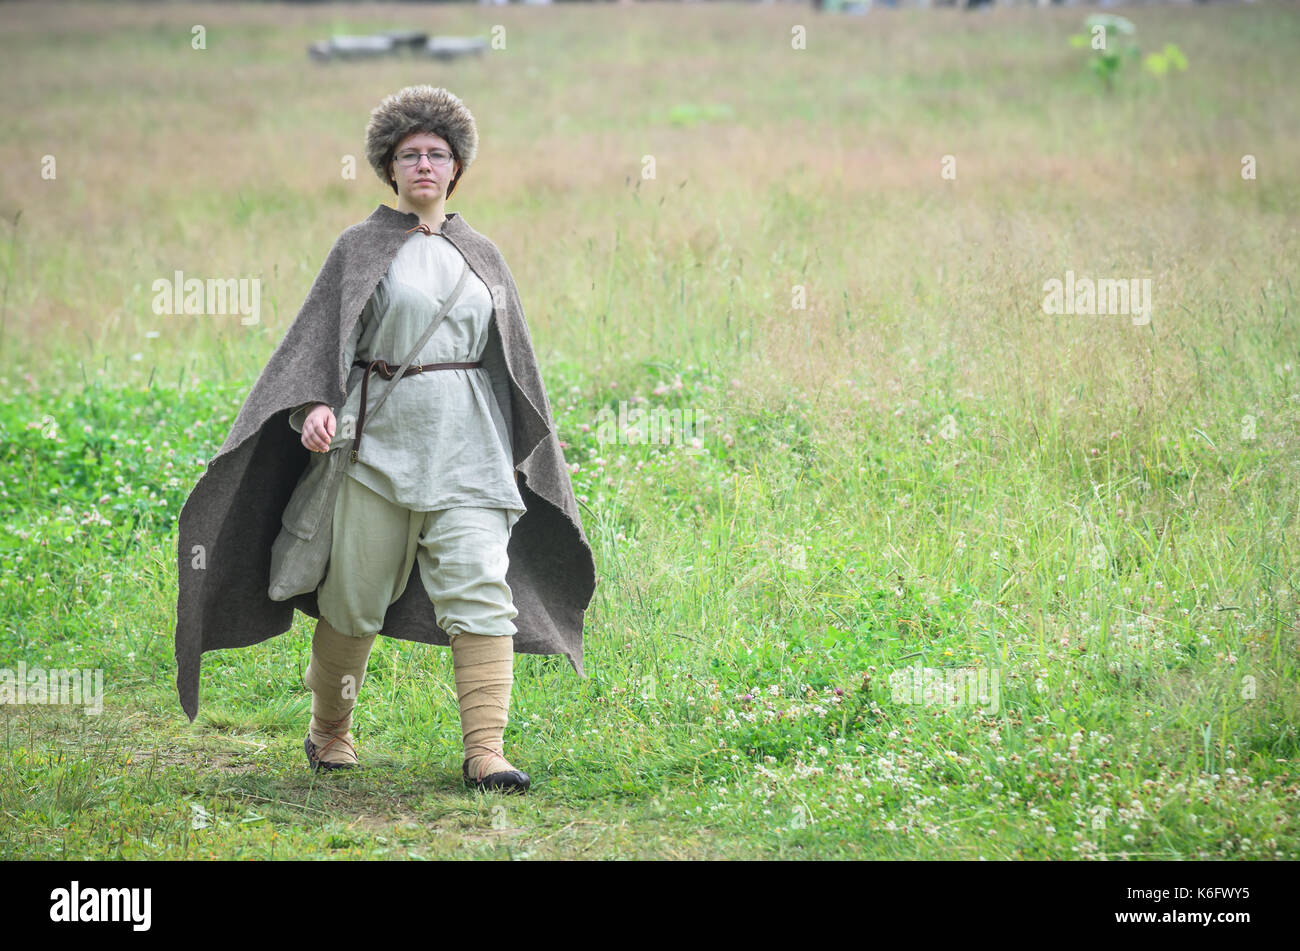 MOSCOW,RUSSIA-June 06,2016: Man in ancient merchant costume stands on green field of grass Stock Photo